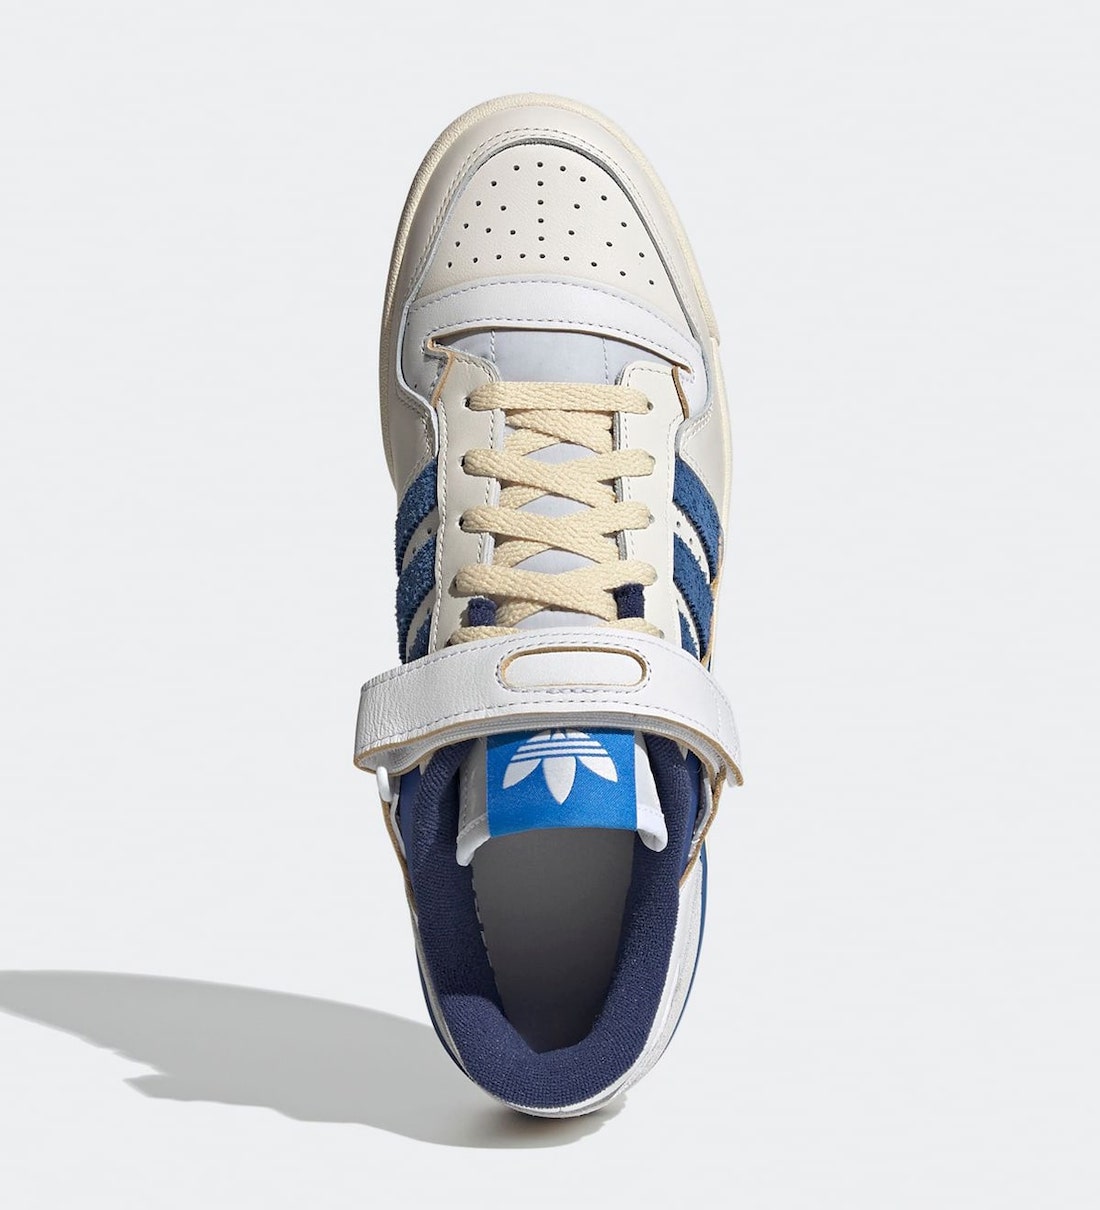 adidas Forum 84 Low OG Bright Blue S23764 Release Date